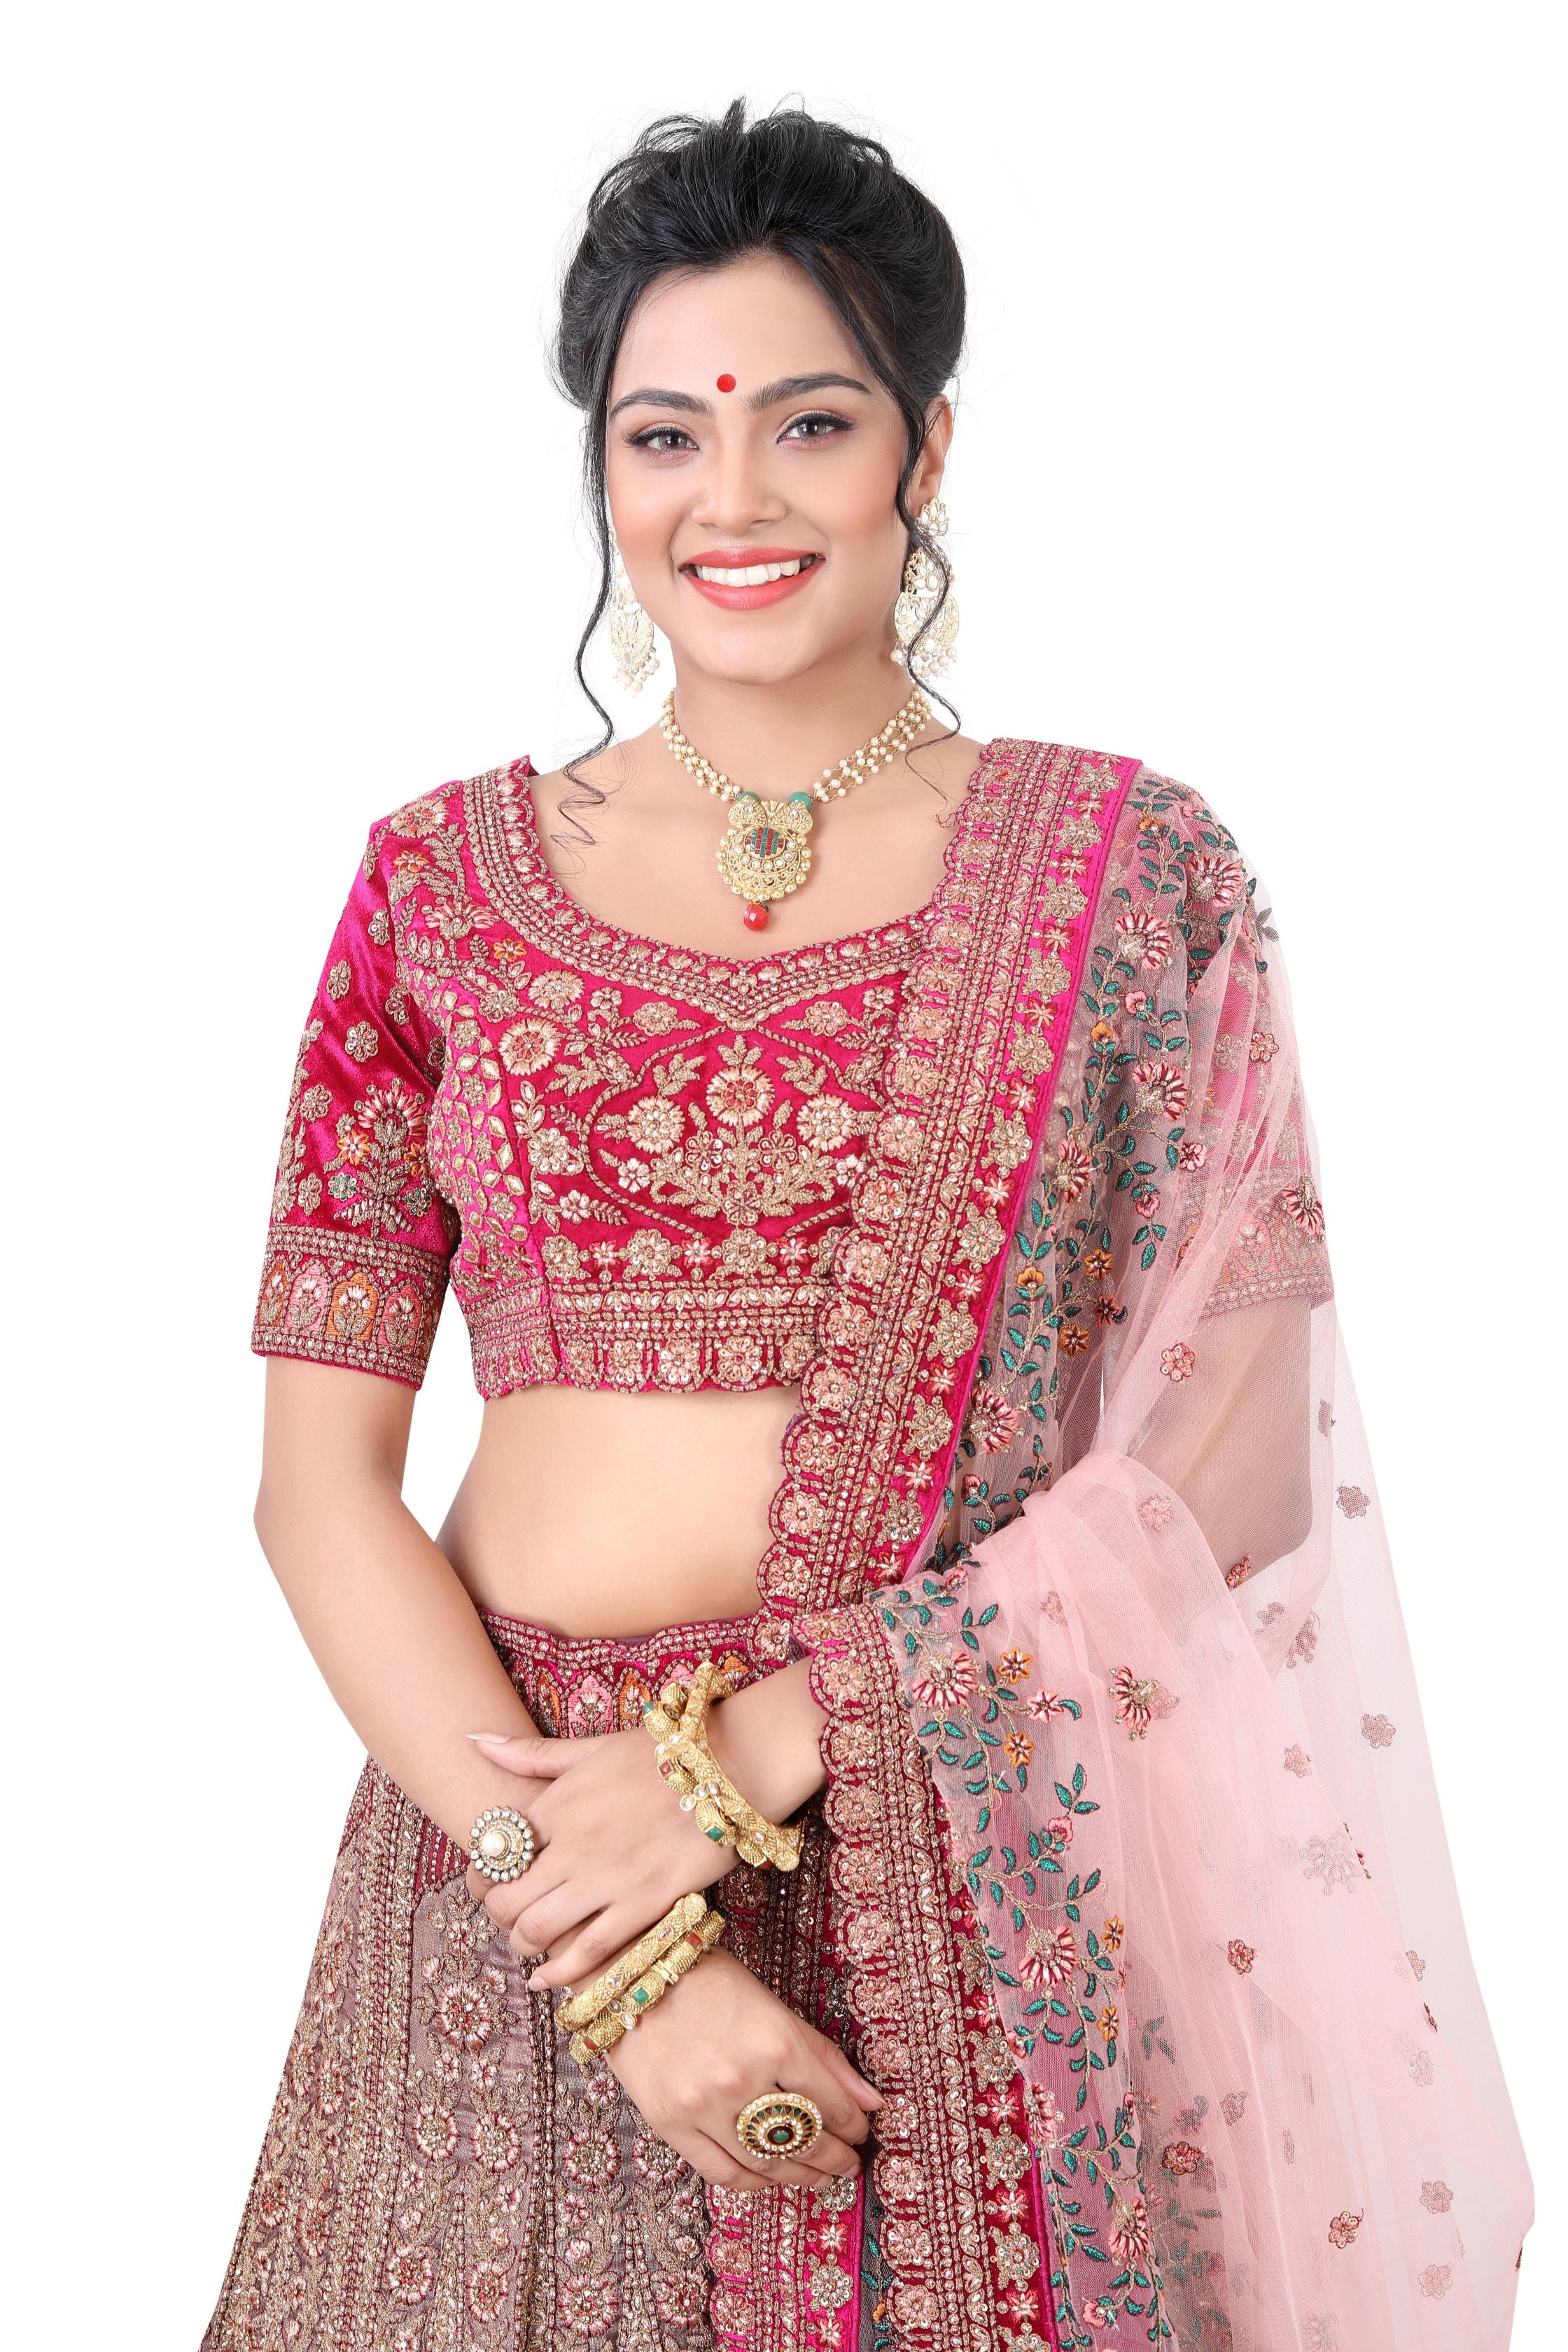 Tissue and Velvet Bridal Lehenga Choli in Pink and Gold color